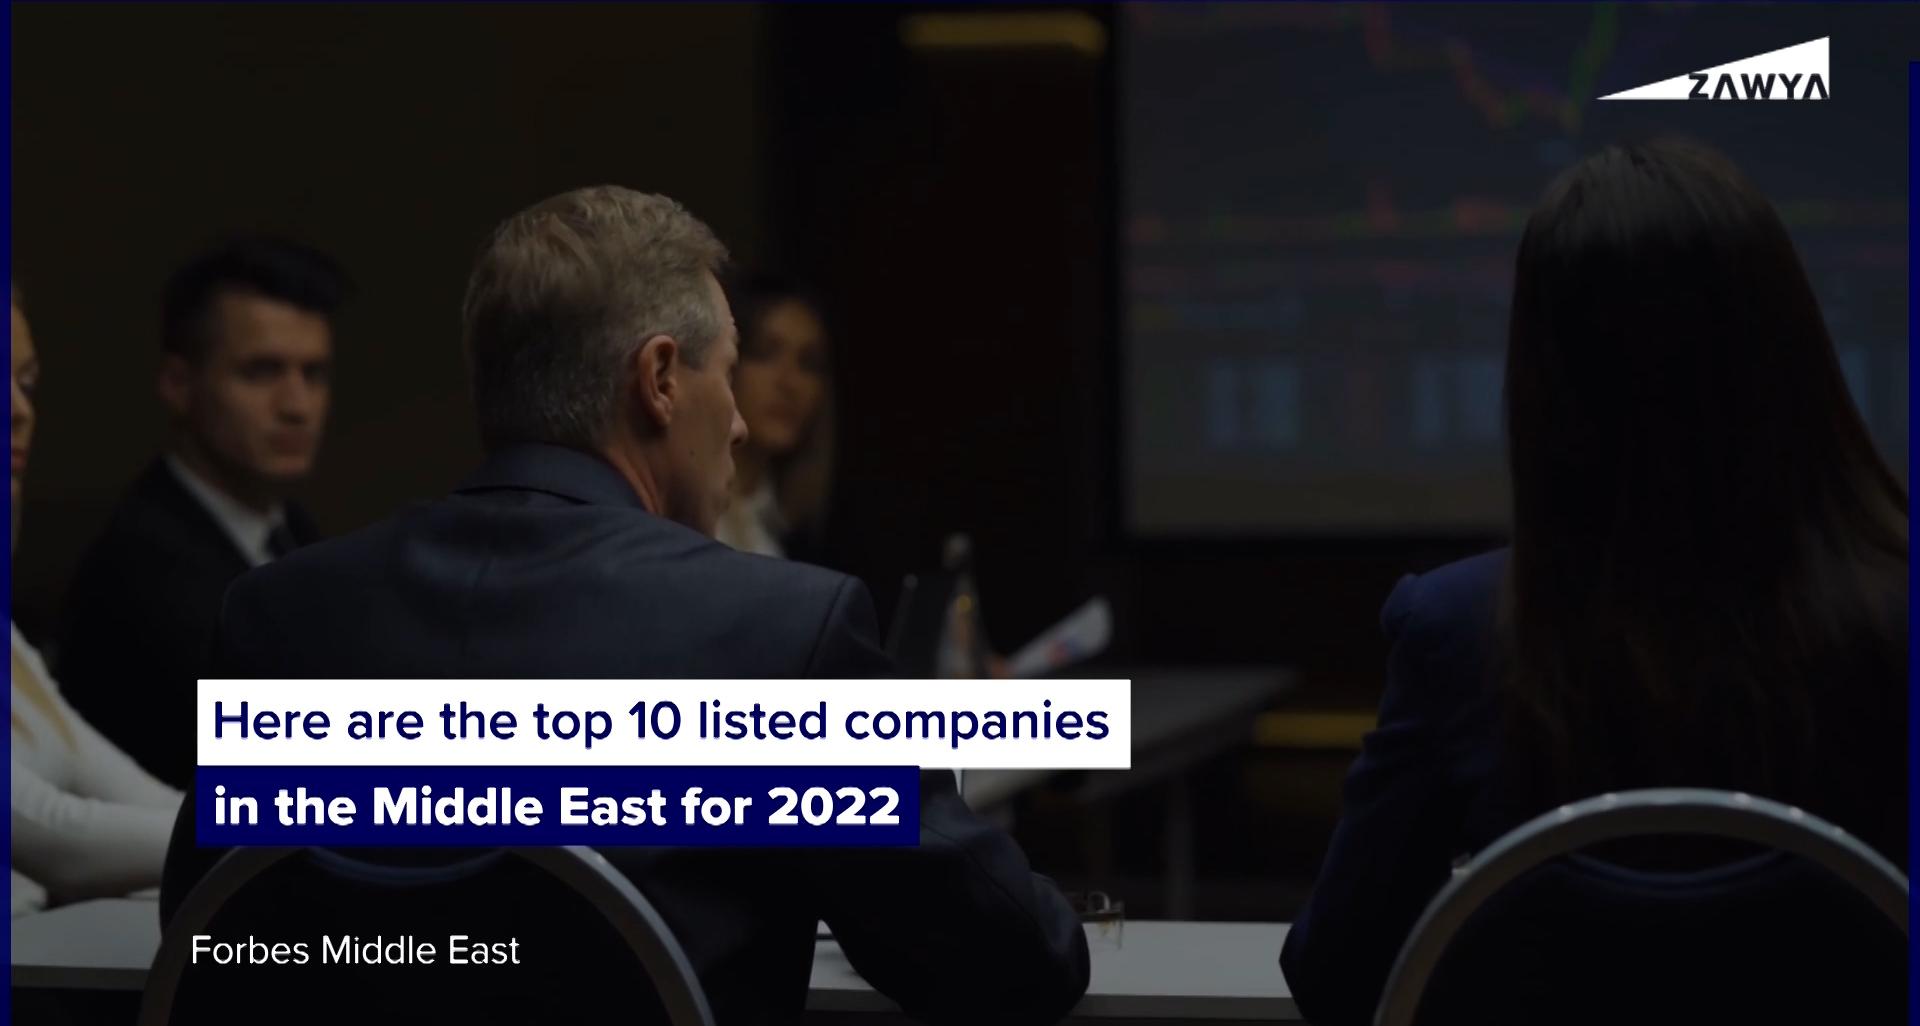 Top 10 listed companies in the Middle East